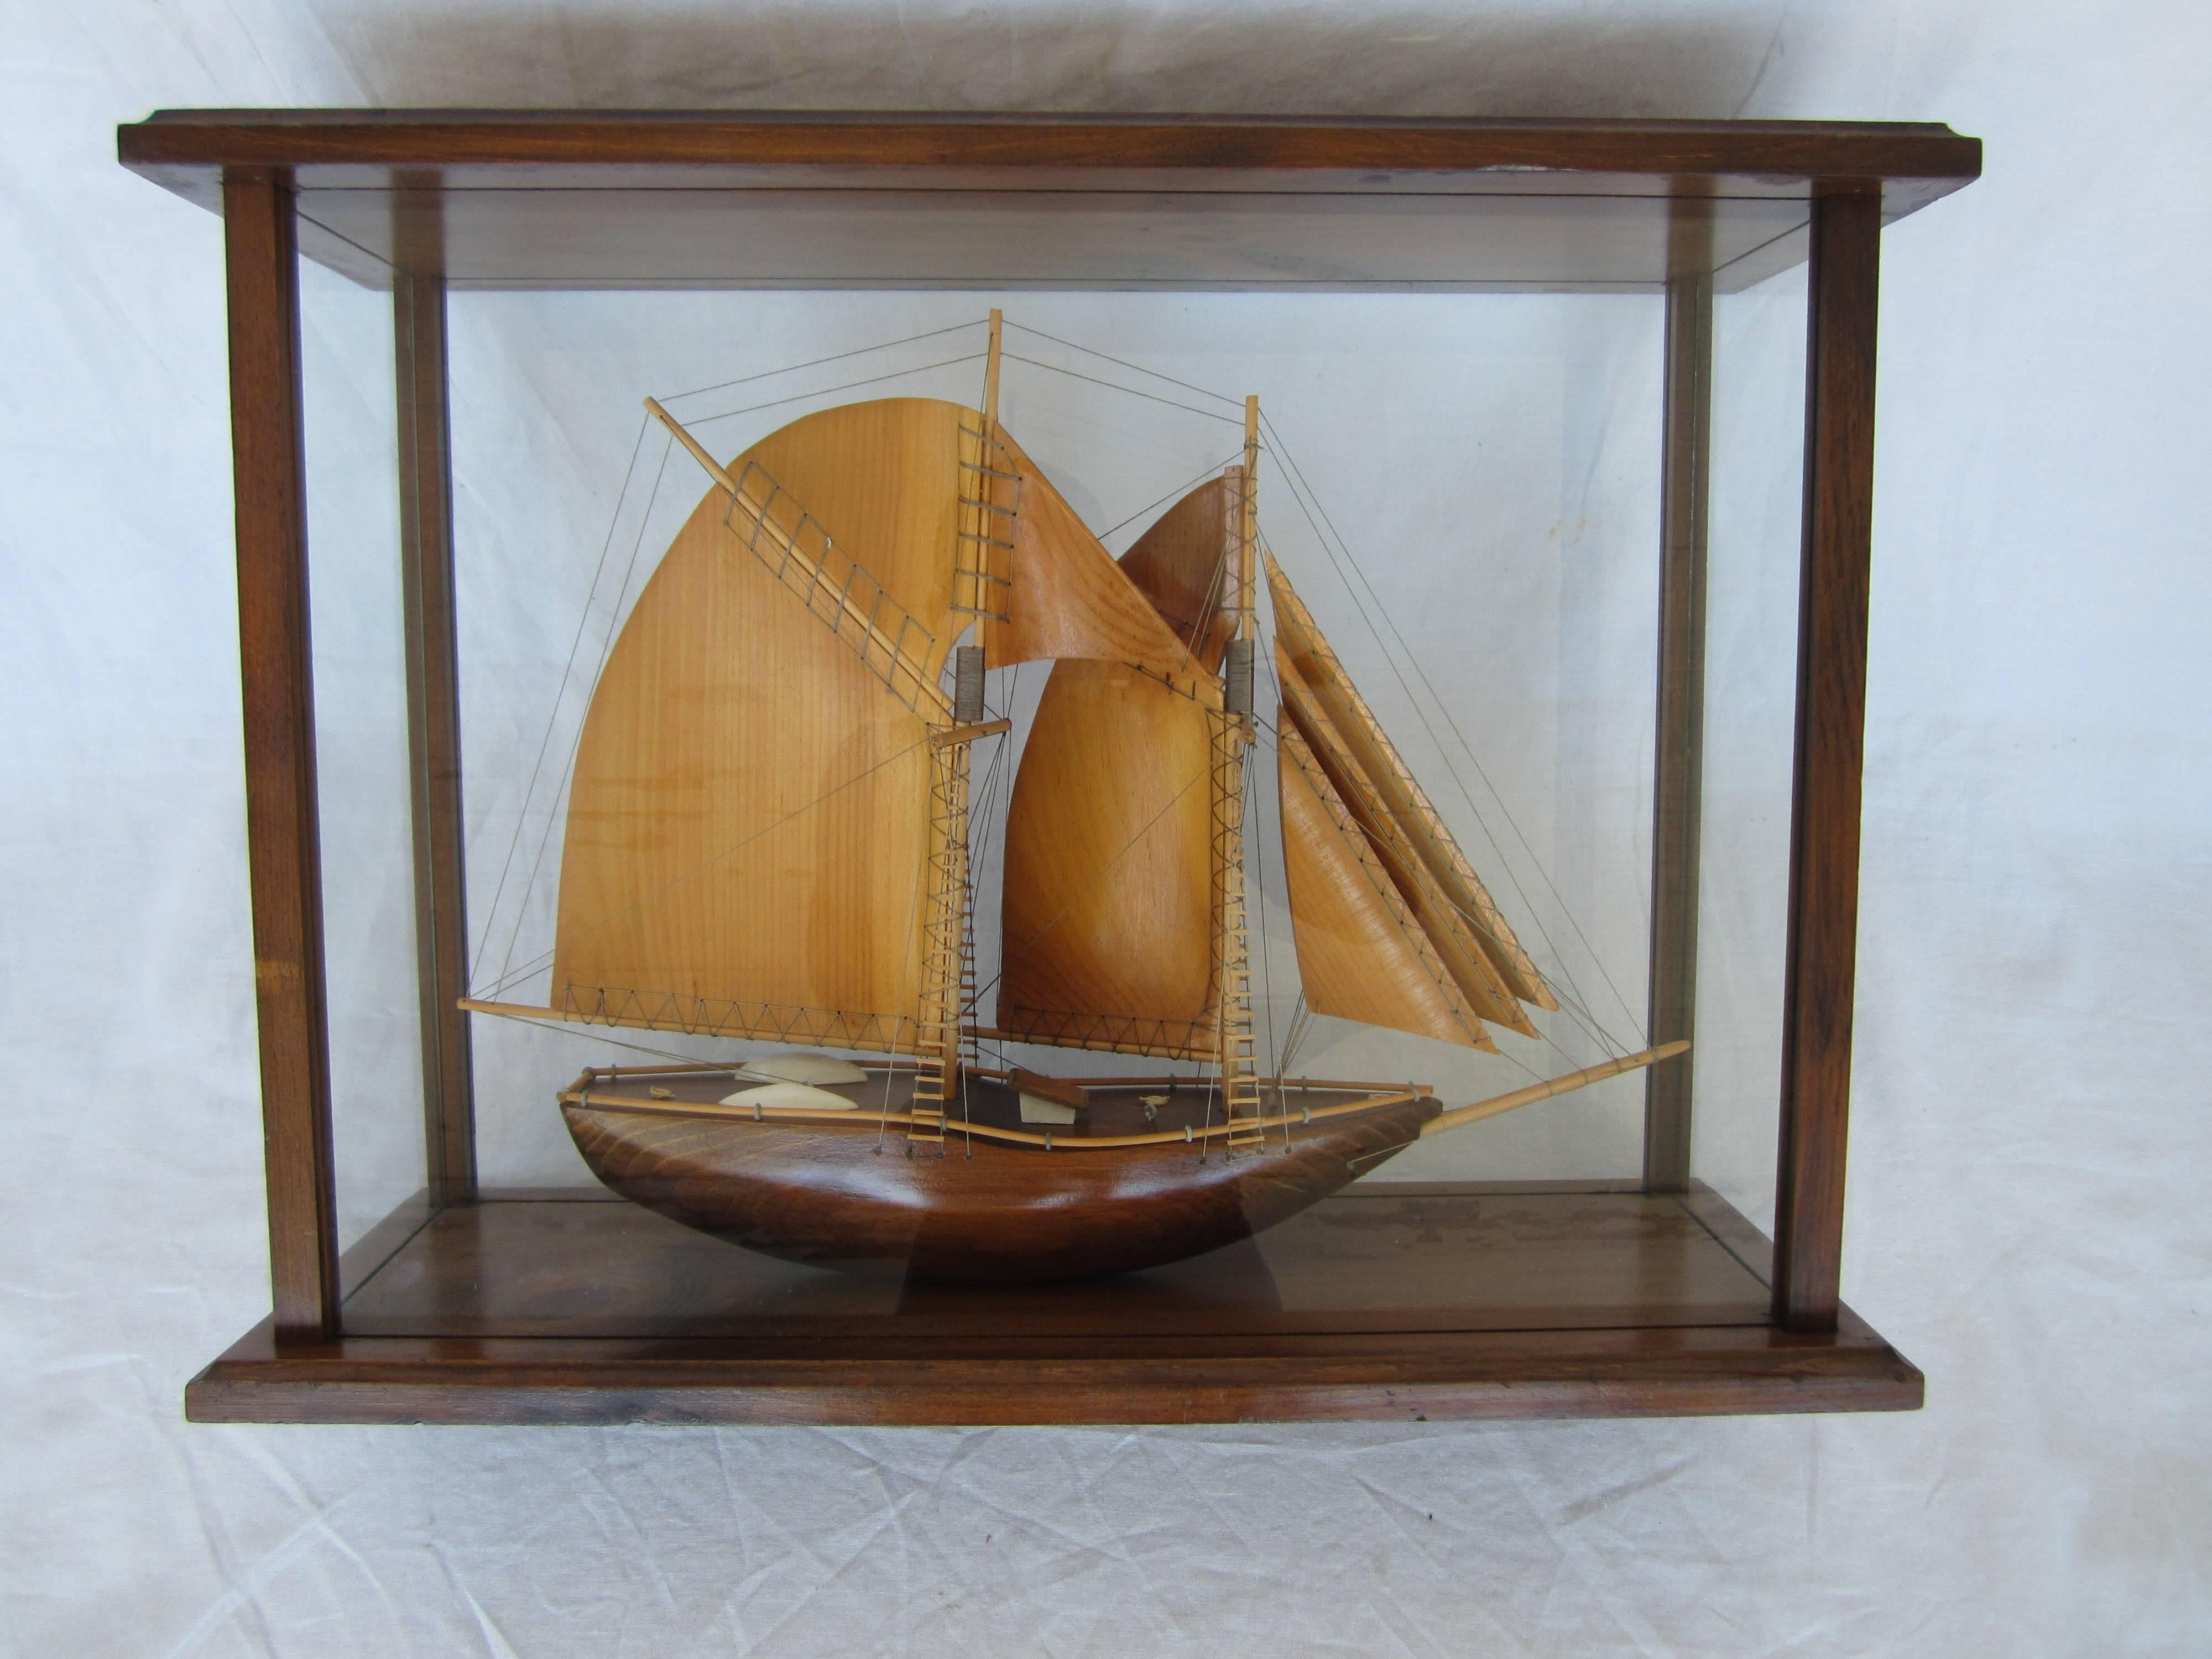 20th Century Chinese Ship in a Glass Showcase